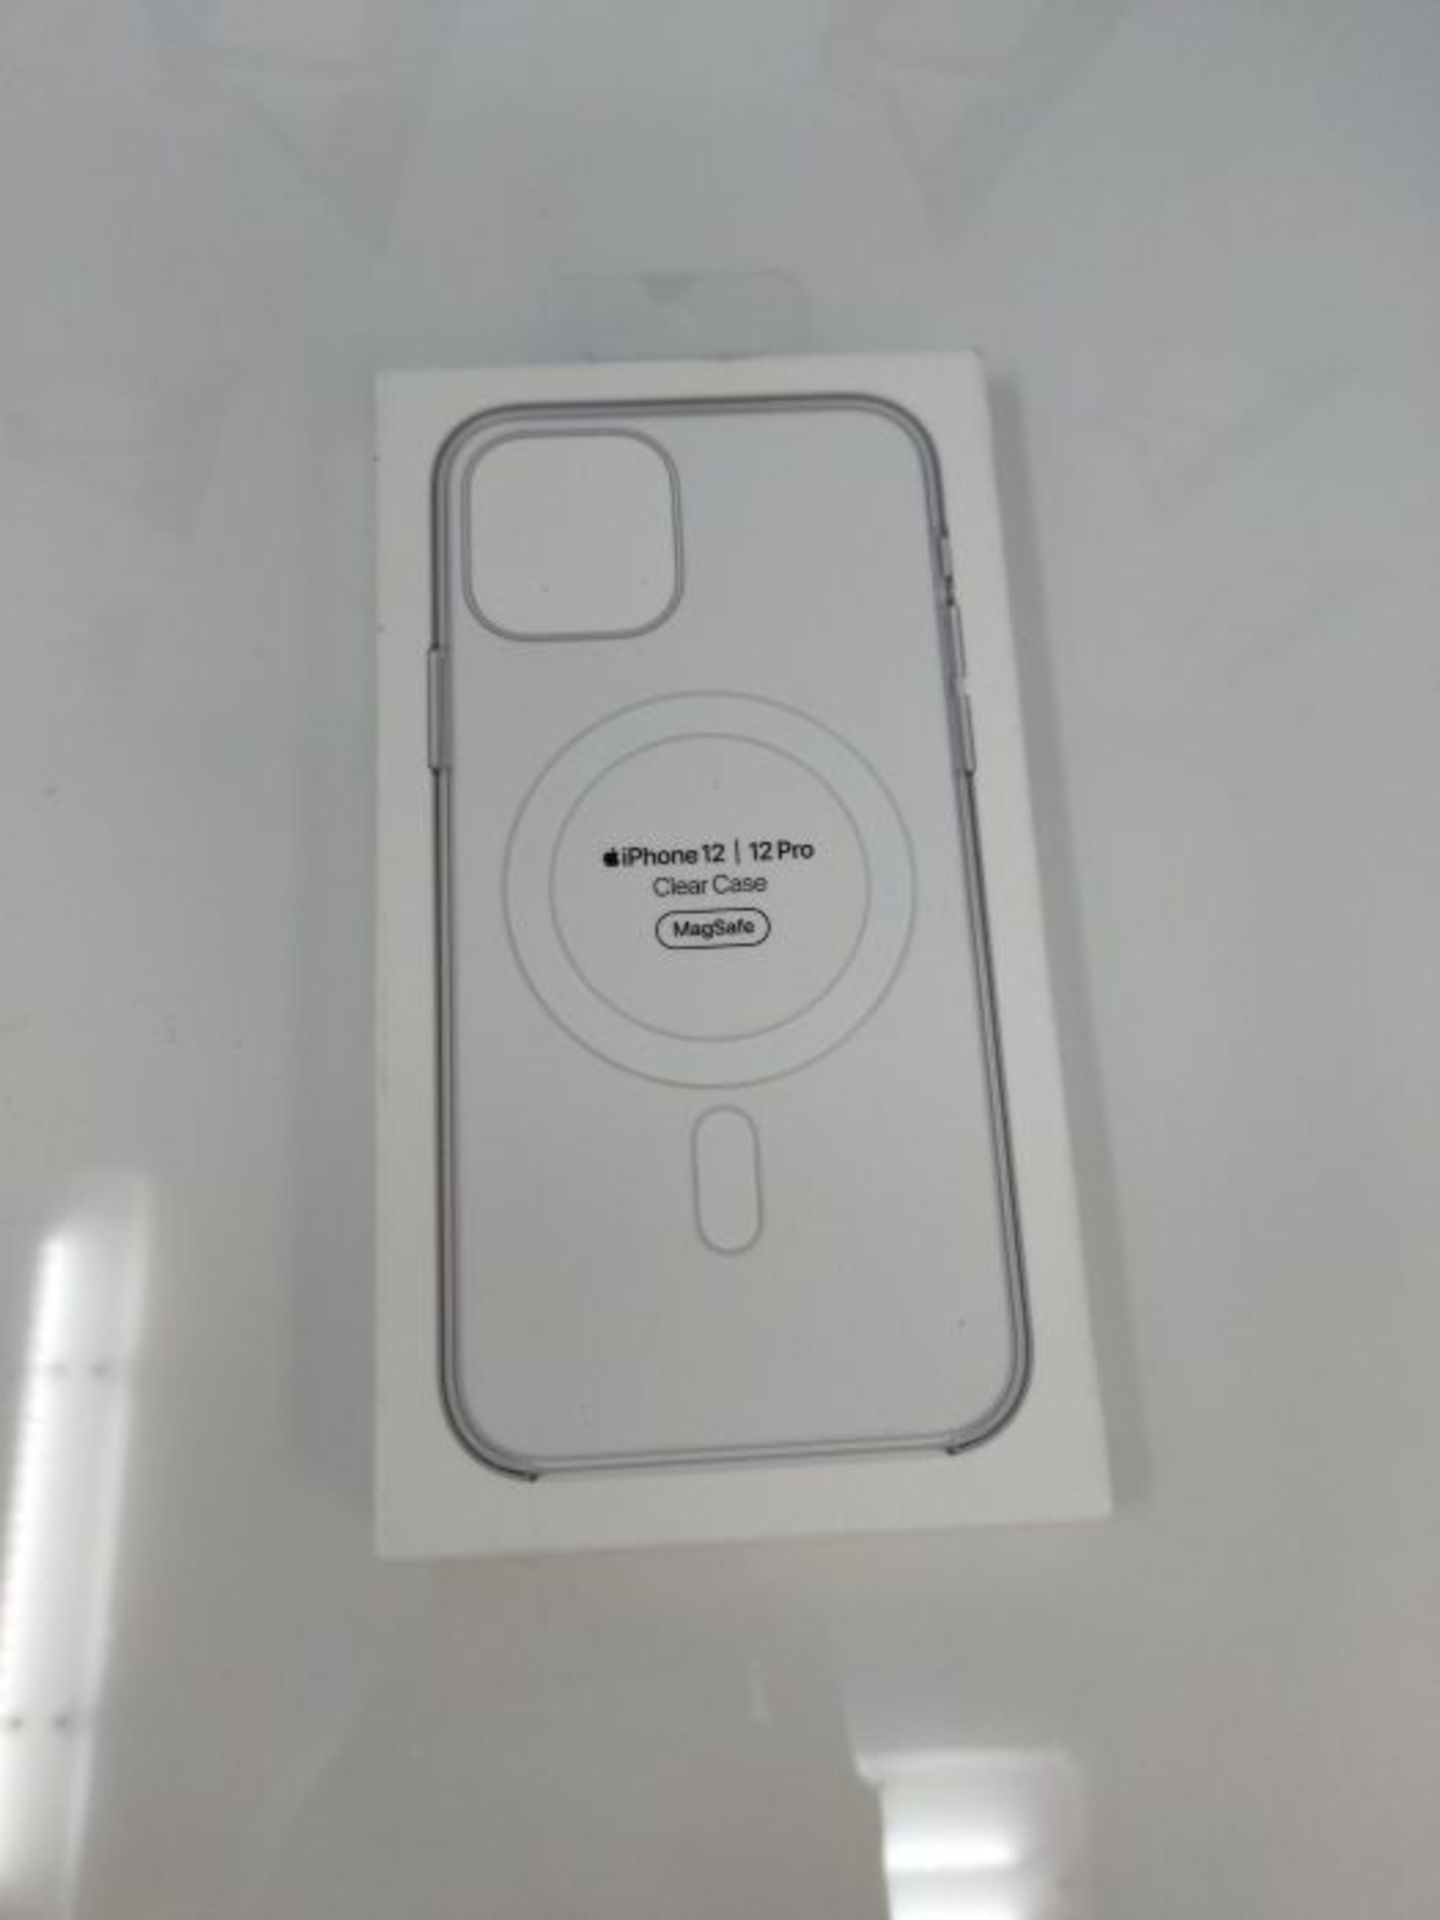 Apple Clear Case (for iPhone 12 | 12 Pro) - 6.1 inches - Image 2 of 3